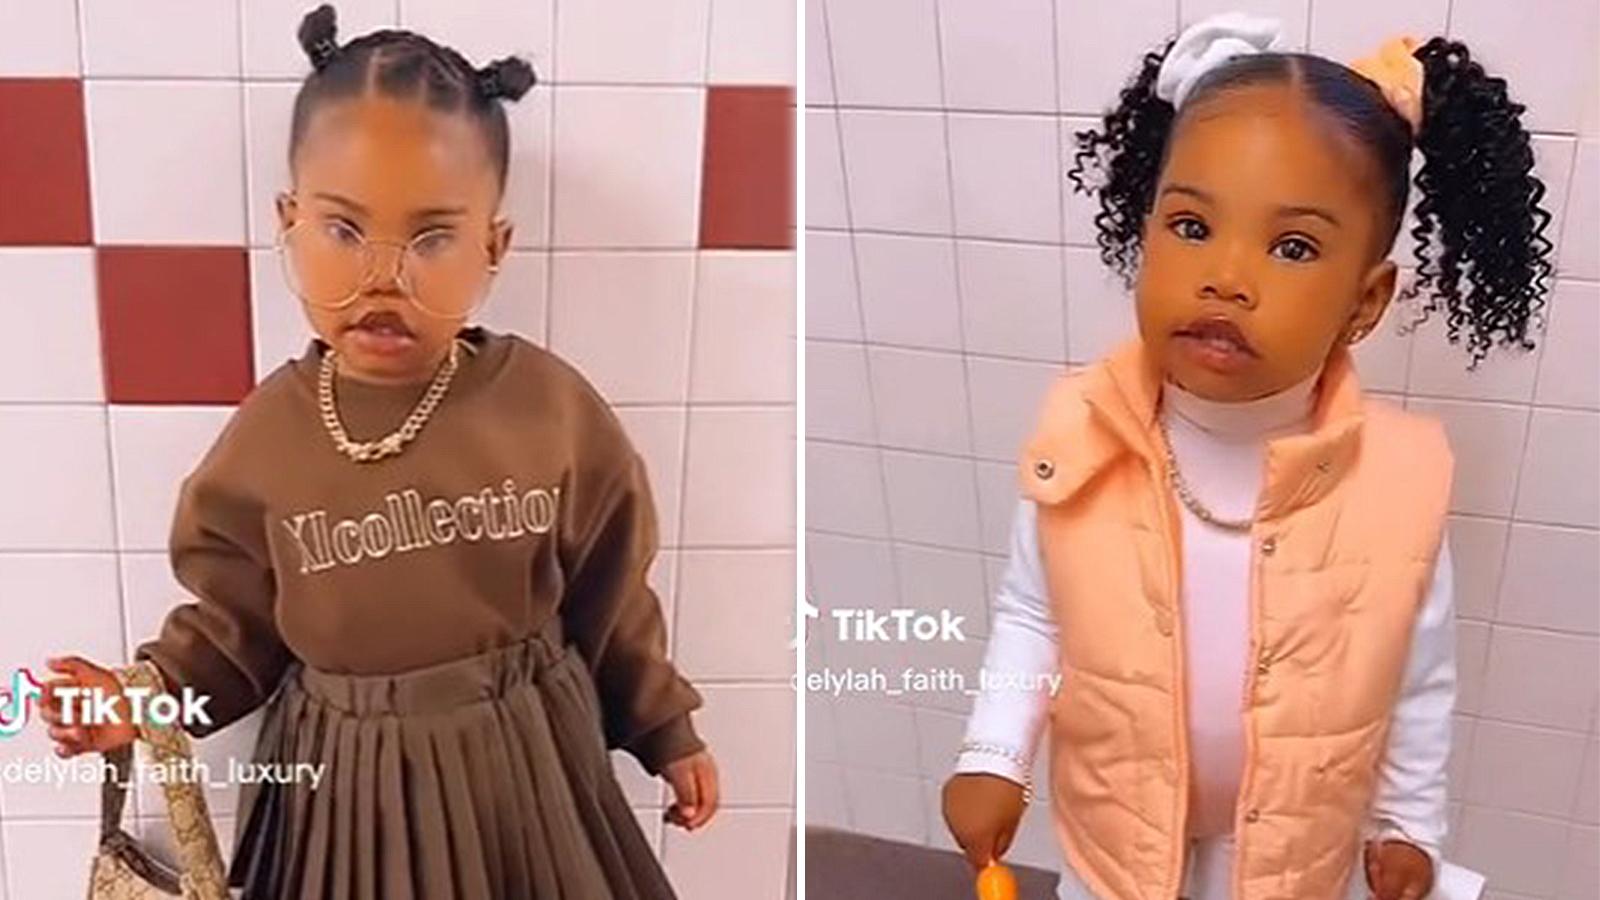 TikTok mom comes under fire for dressing toddler in inappropriate outfits